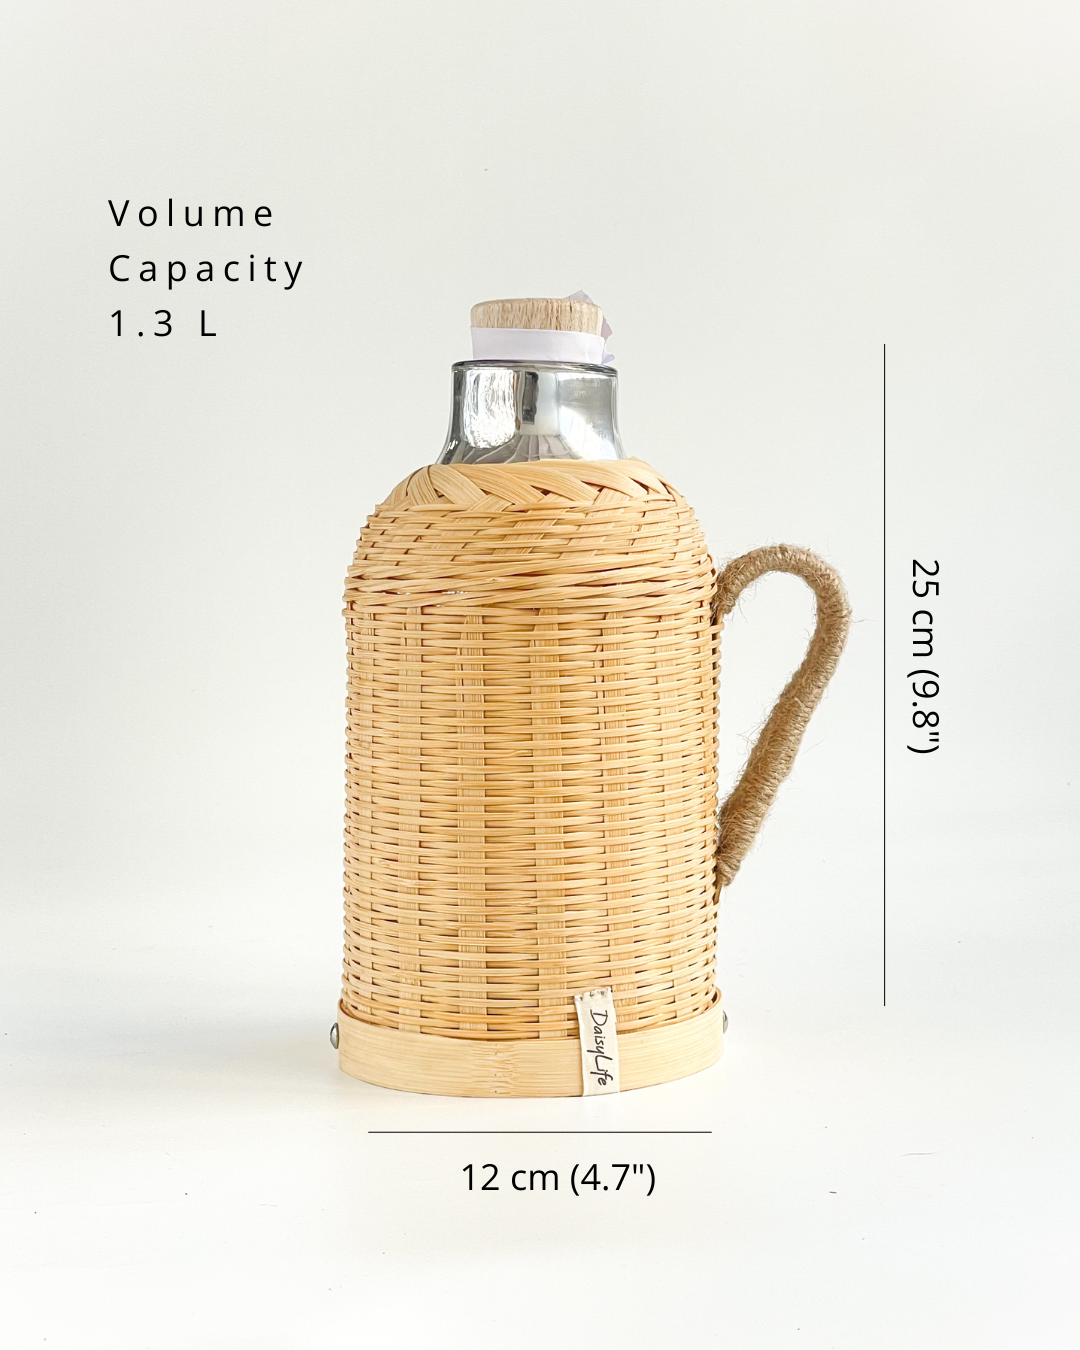 Small Bamboo Flask Volume Capacity 1.3 L